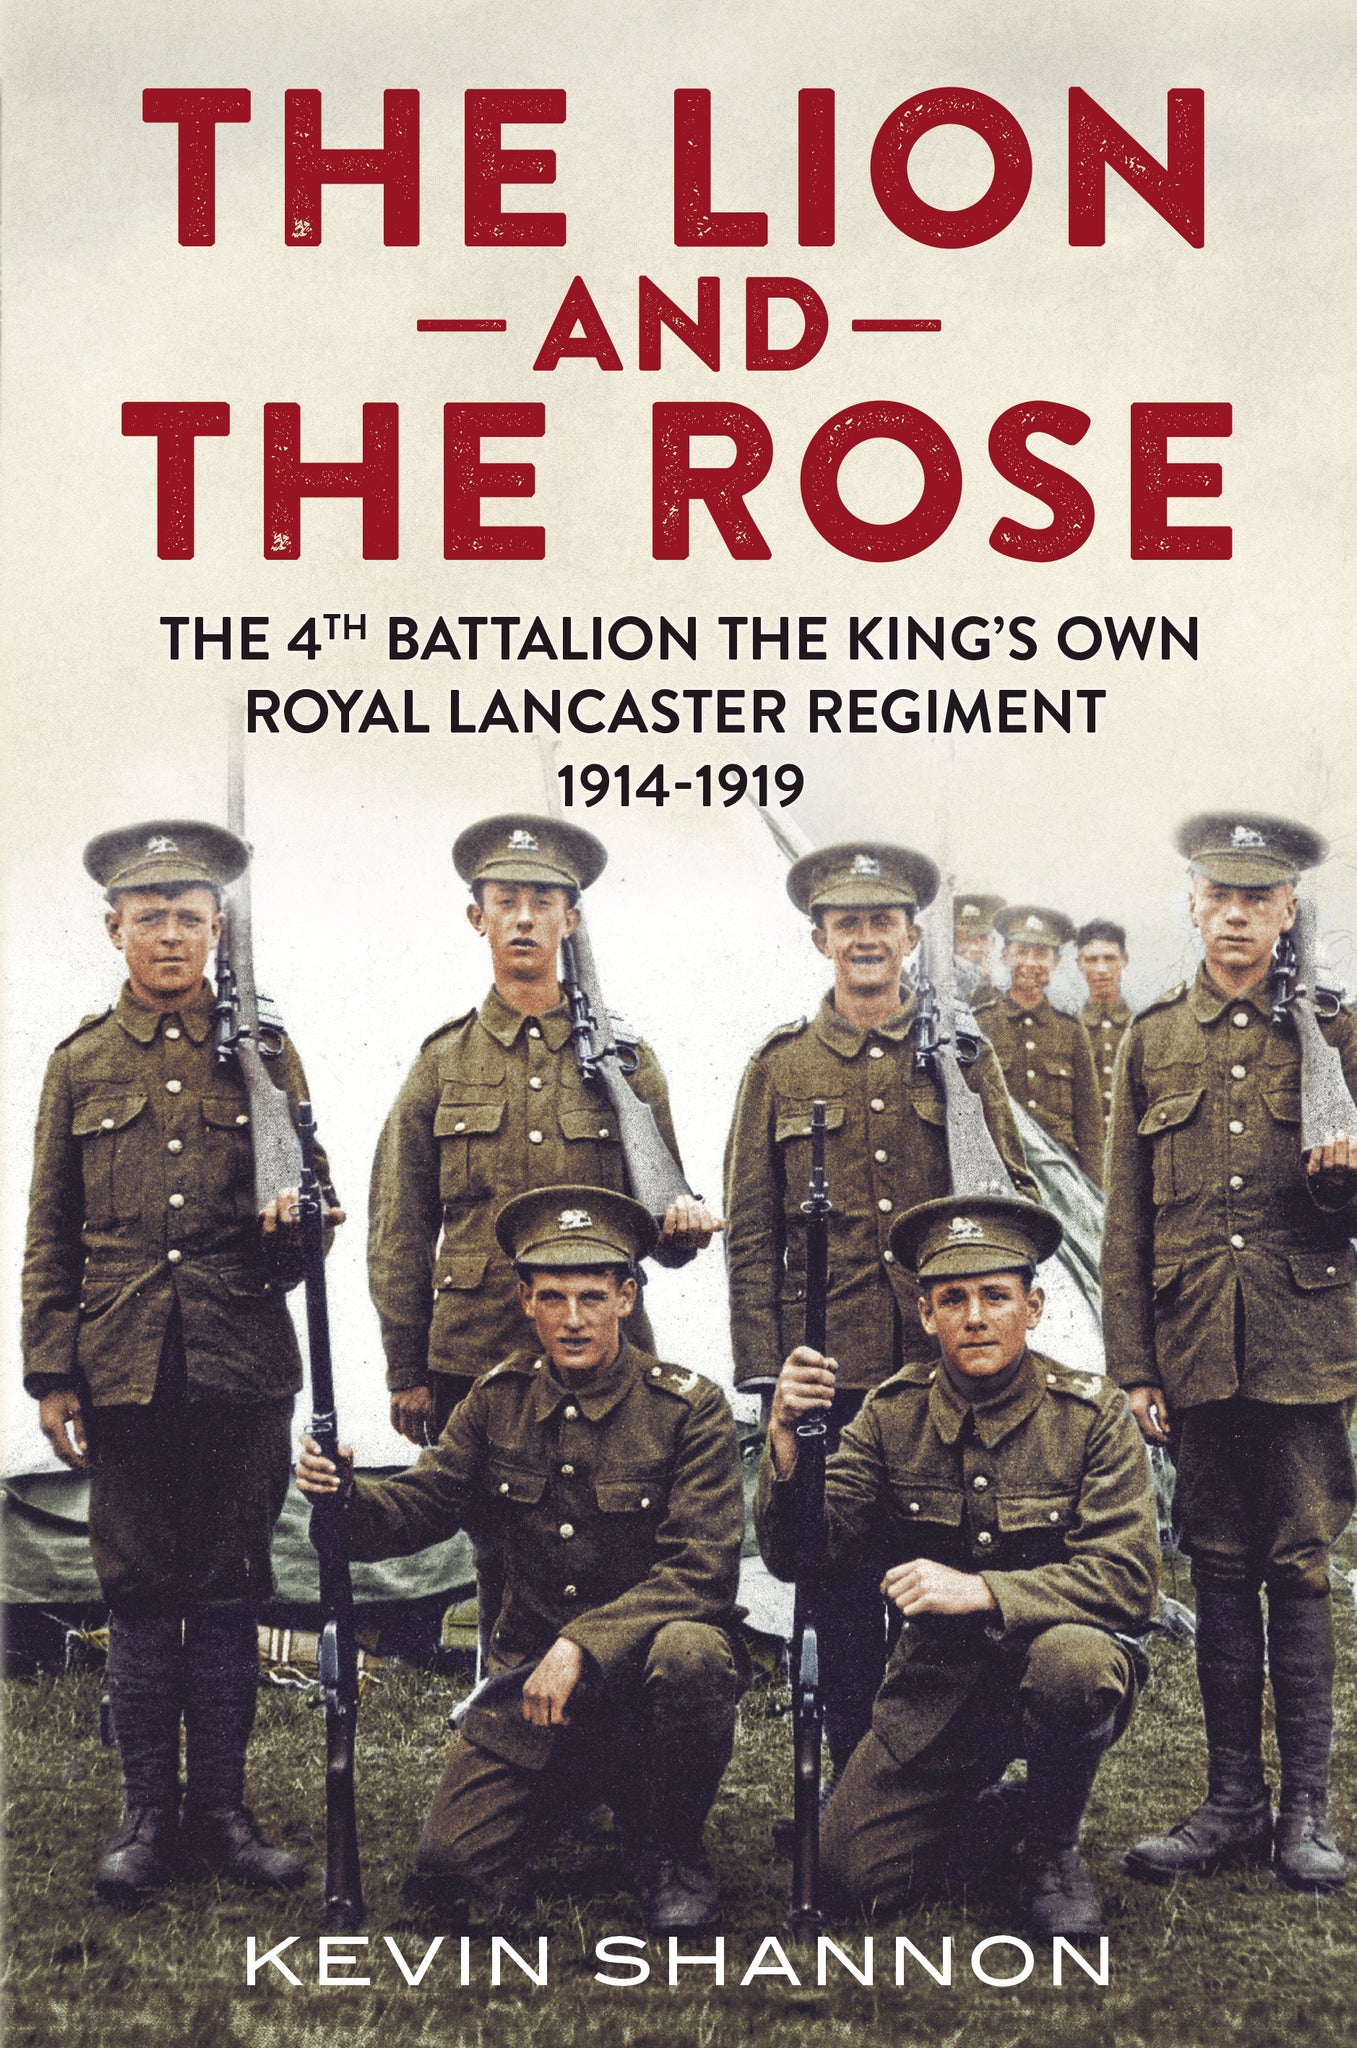 The Lion and the Rose: The 4th Battalion The King’s Own Royal Lancaster Regiment 1914-1919